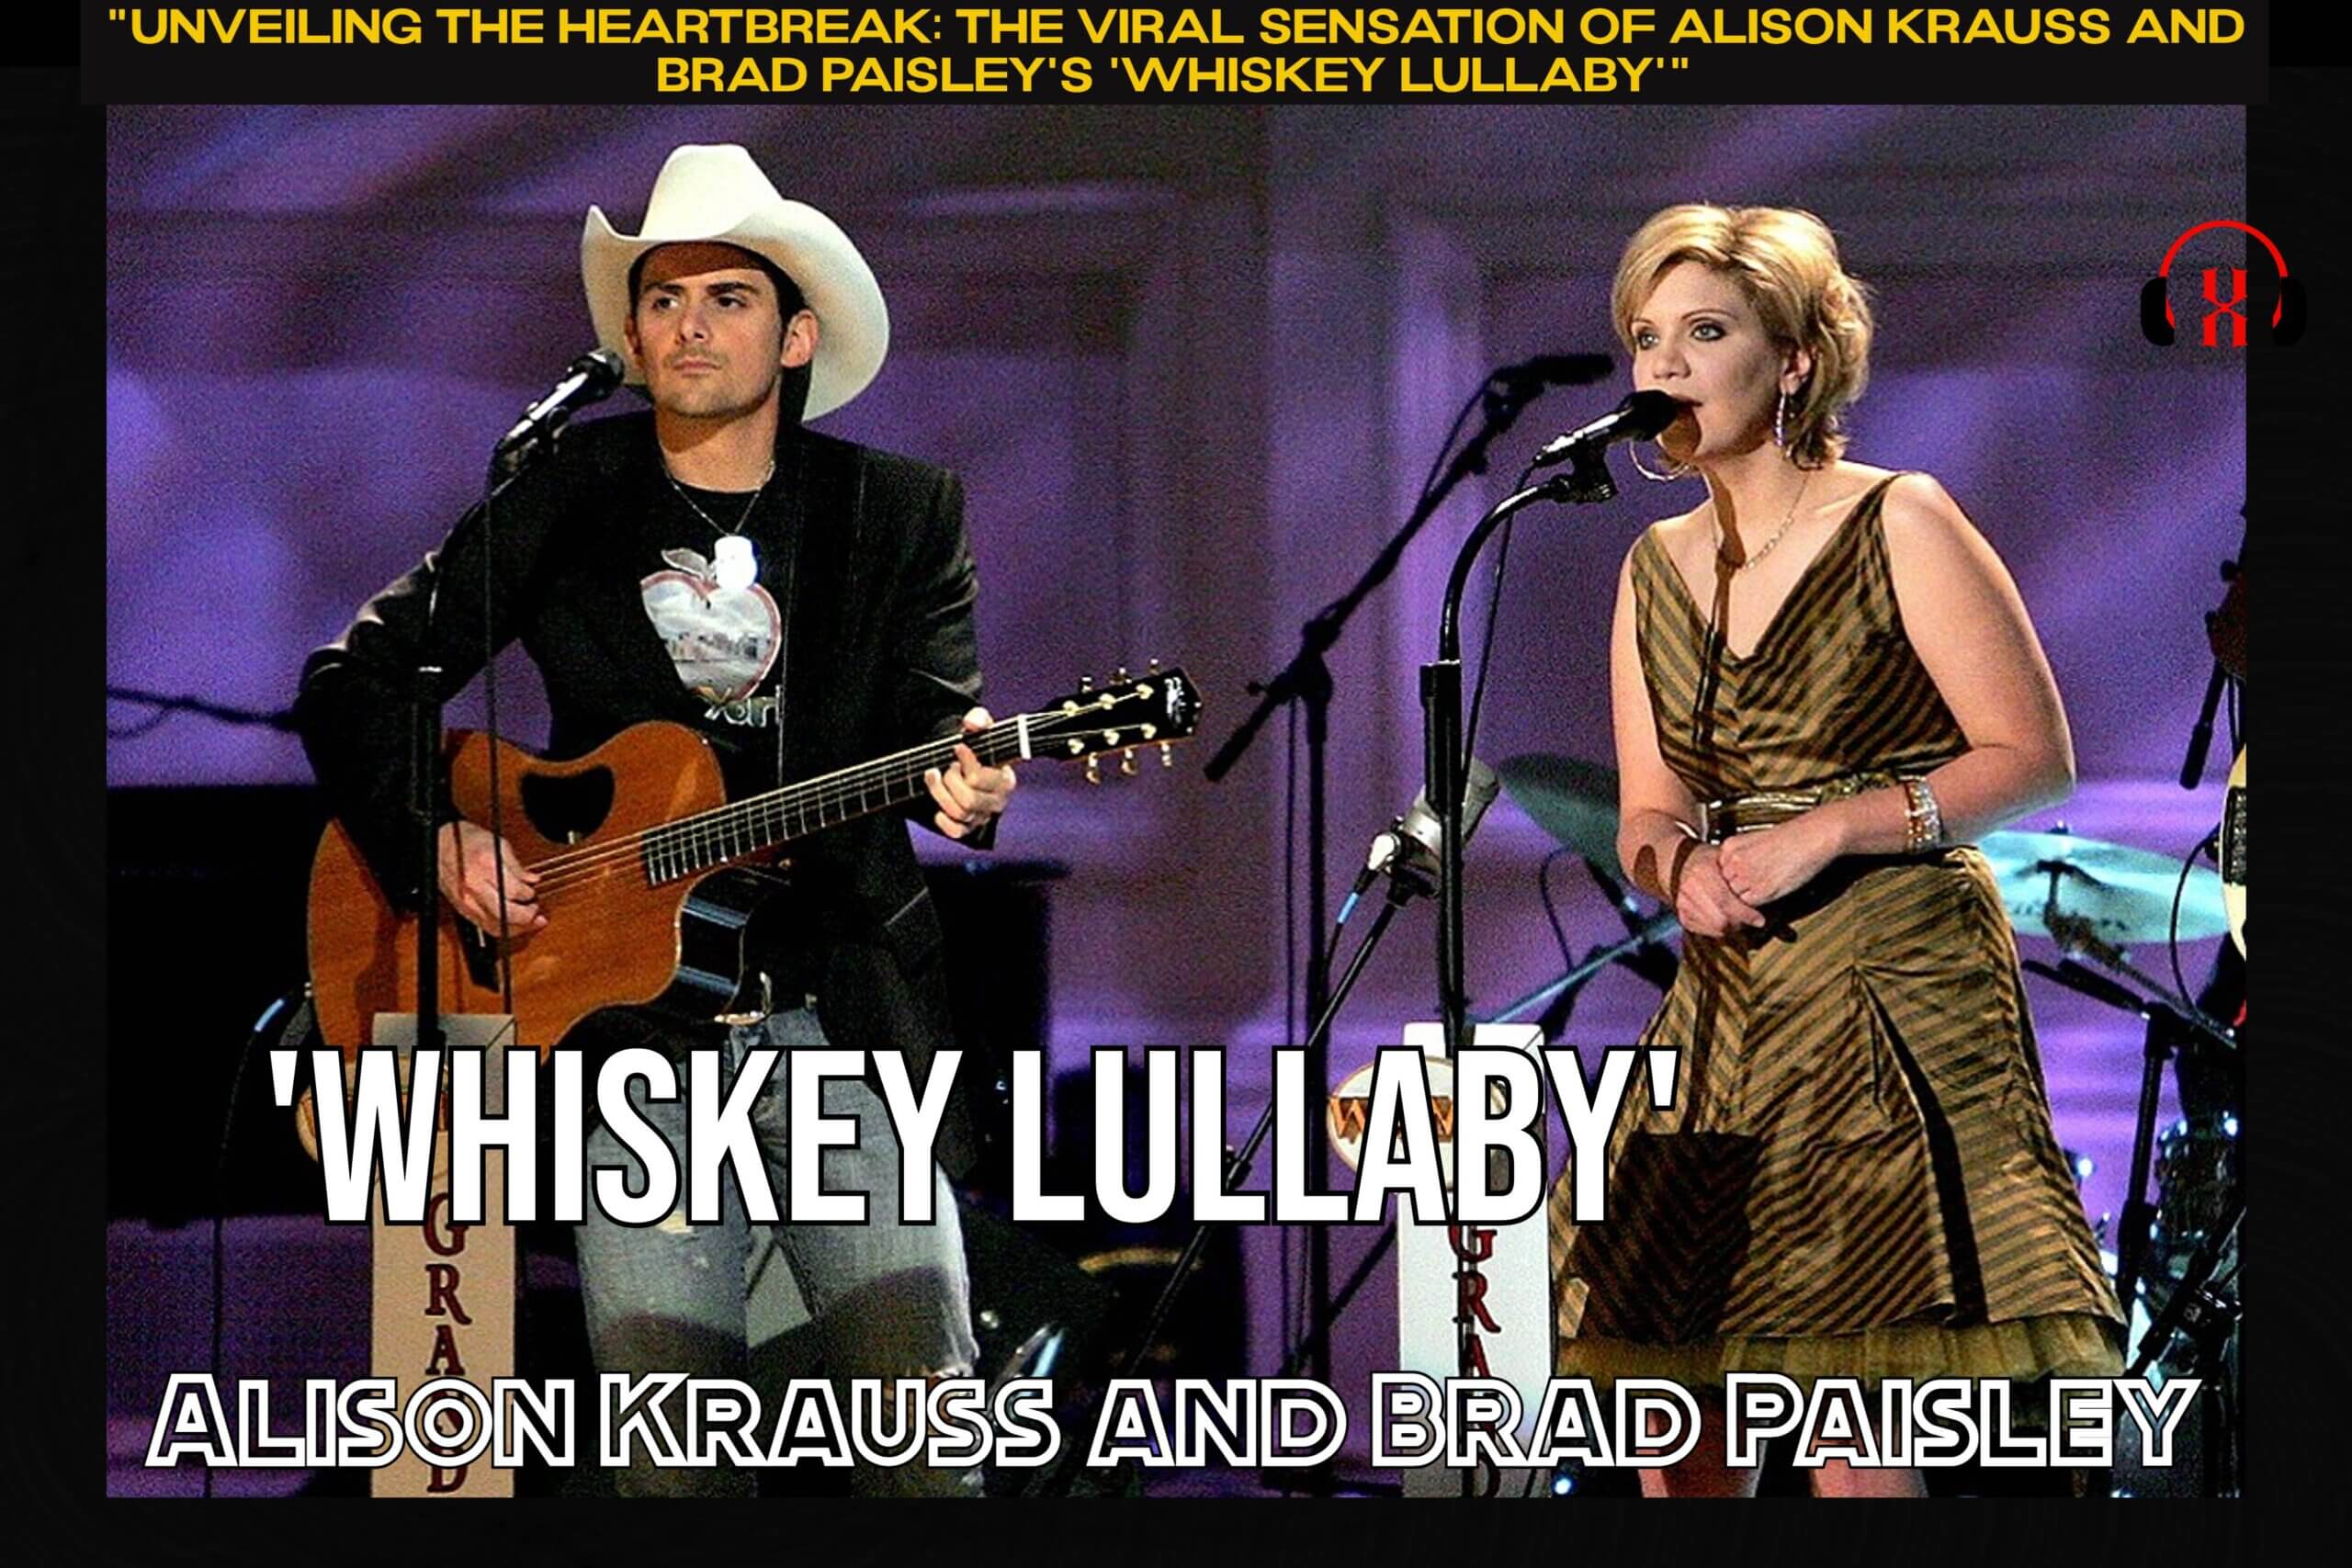 “Unveiling the Heartbreak: The Viral Sensation of Alison Krauss and Brad Paisley’s ‘Whiskey Lullaby'”